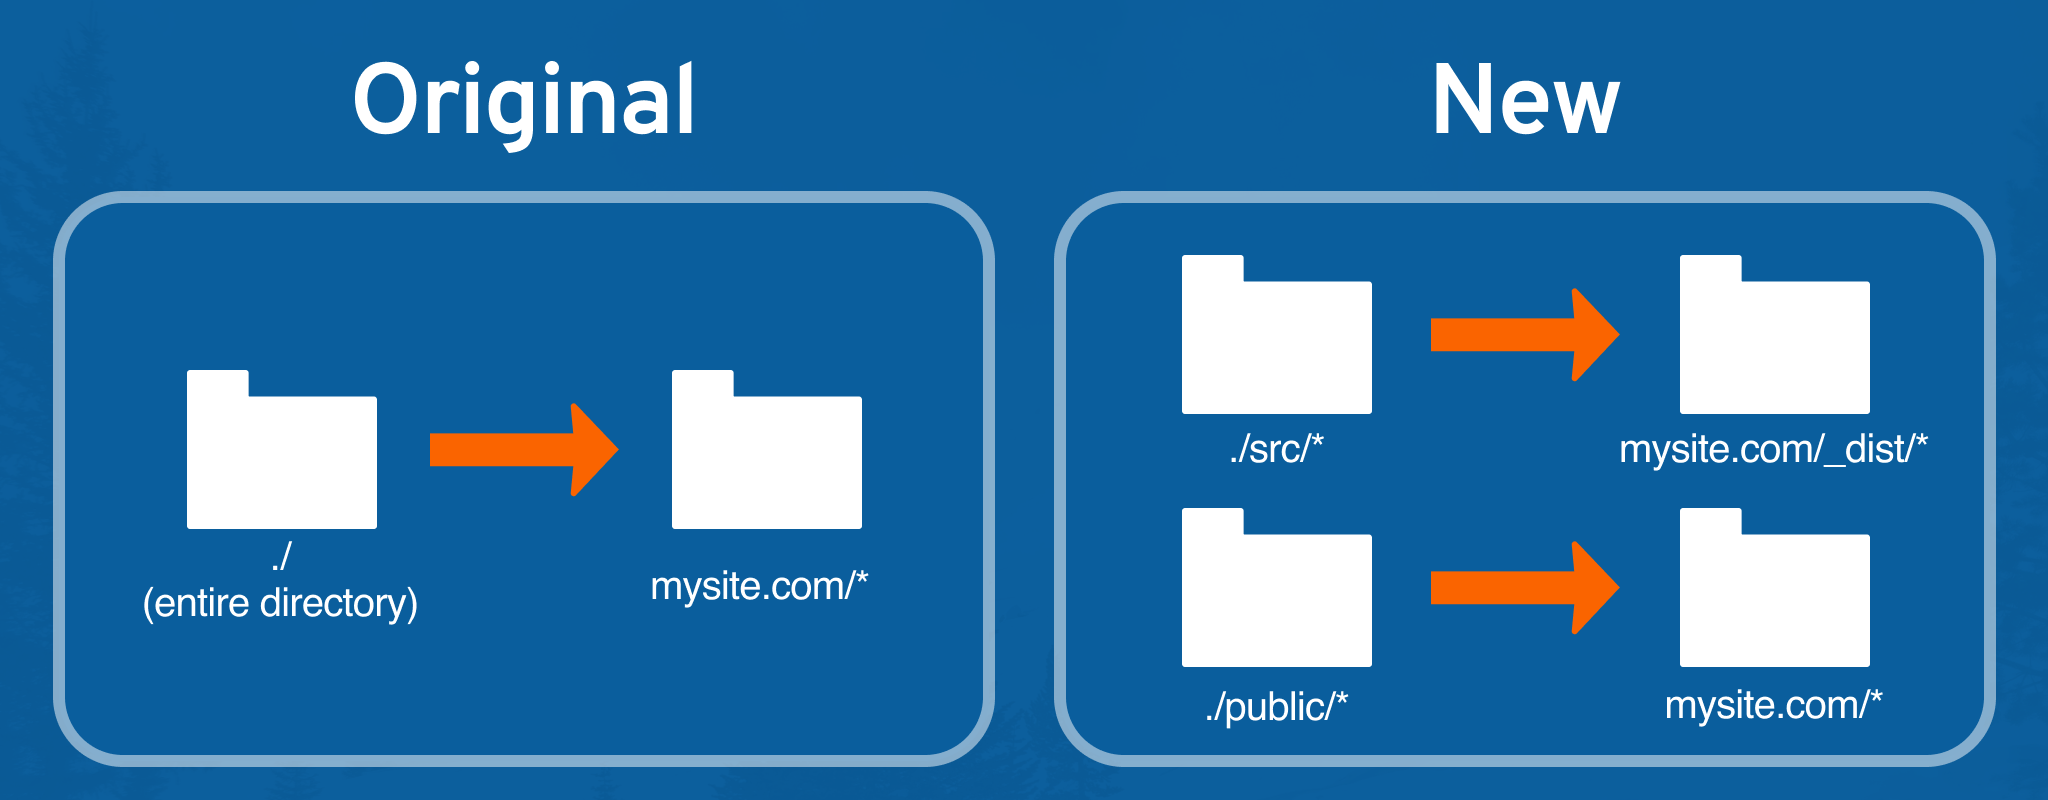 Graphic shows the original and new folder structures side by side. Arrows indicate that the files are built to where the arrow points. The Original side shows a folder labeled ./ entire directory with an arrow pointing to a folder labeled  mysite.com/*. The New side shows a folder labeled ./src/* with an arrow pointing to a folder labeled mysite.com/_dist/*. Then a second folder labeled ./public/* with an arrow pointing to a folder labeled mysite.com/* 